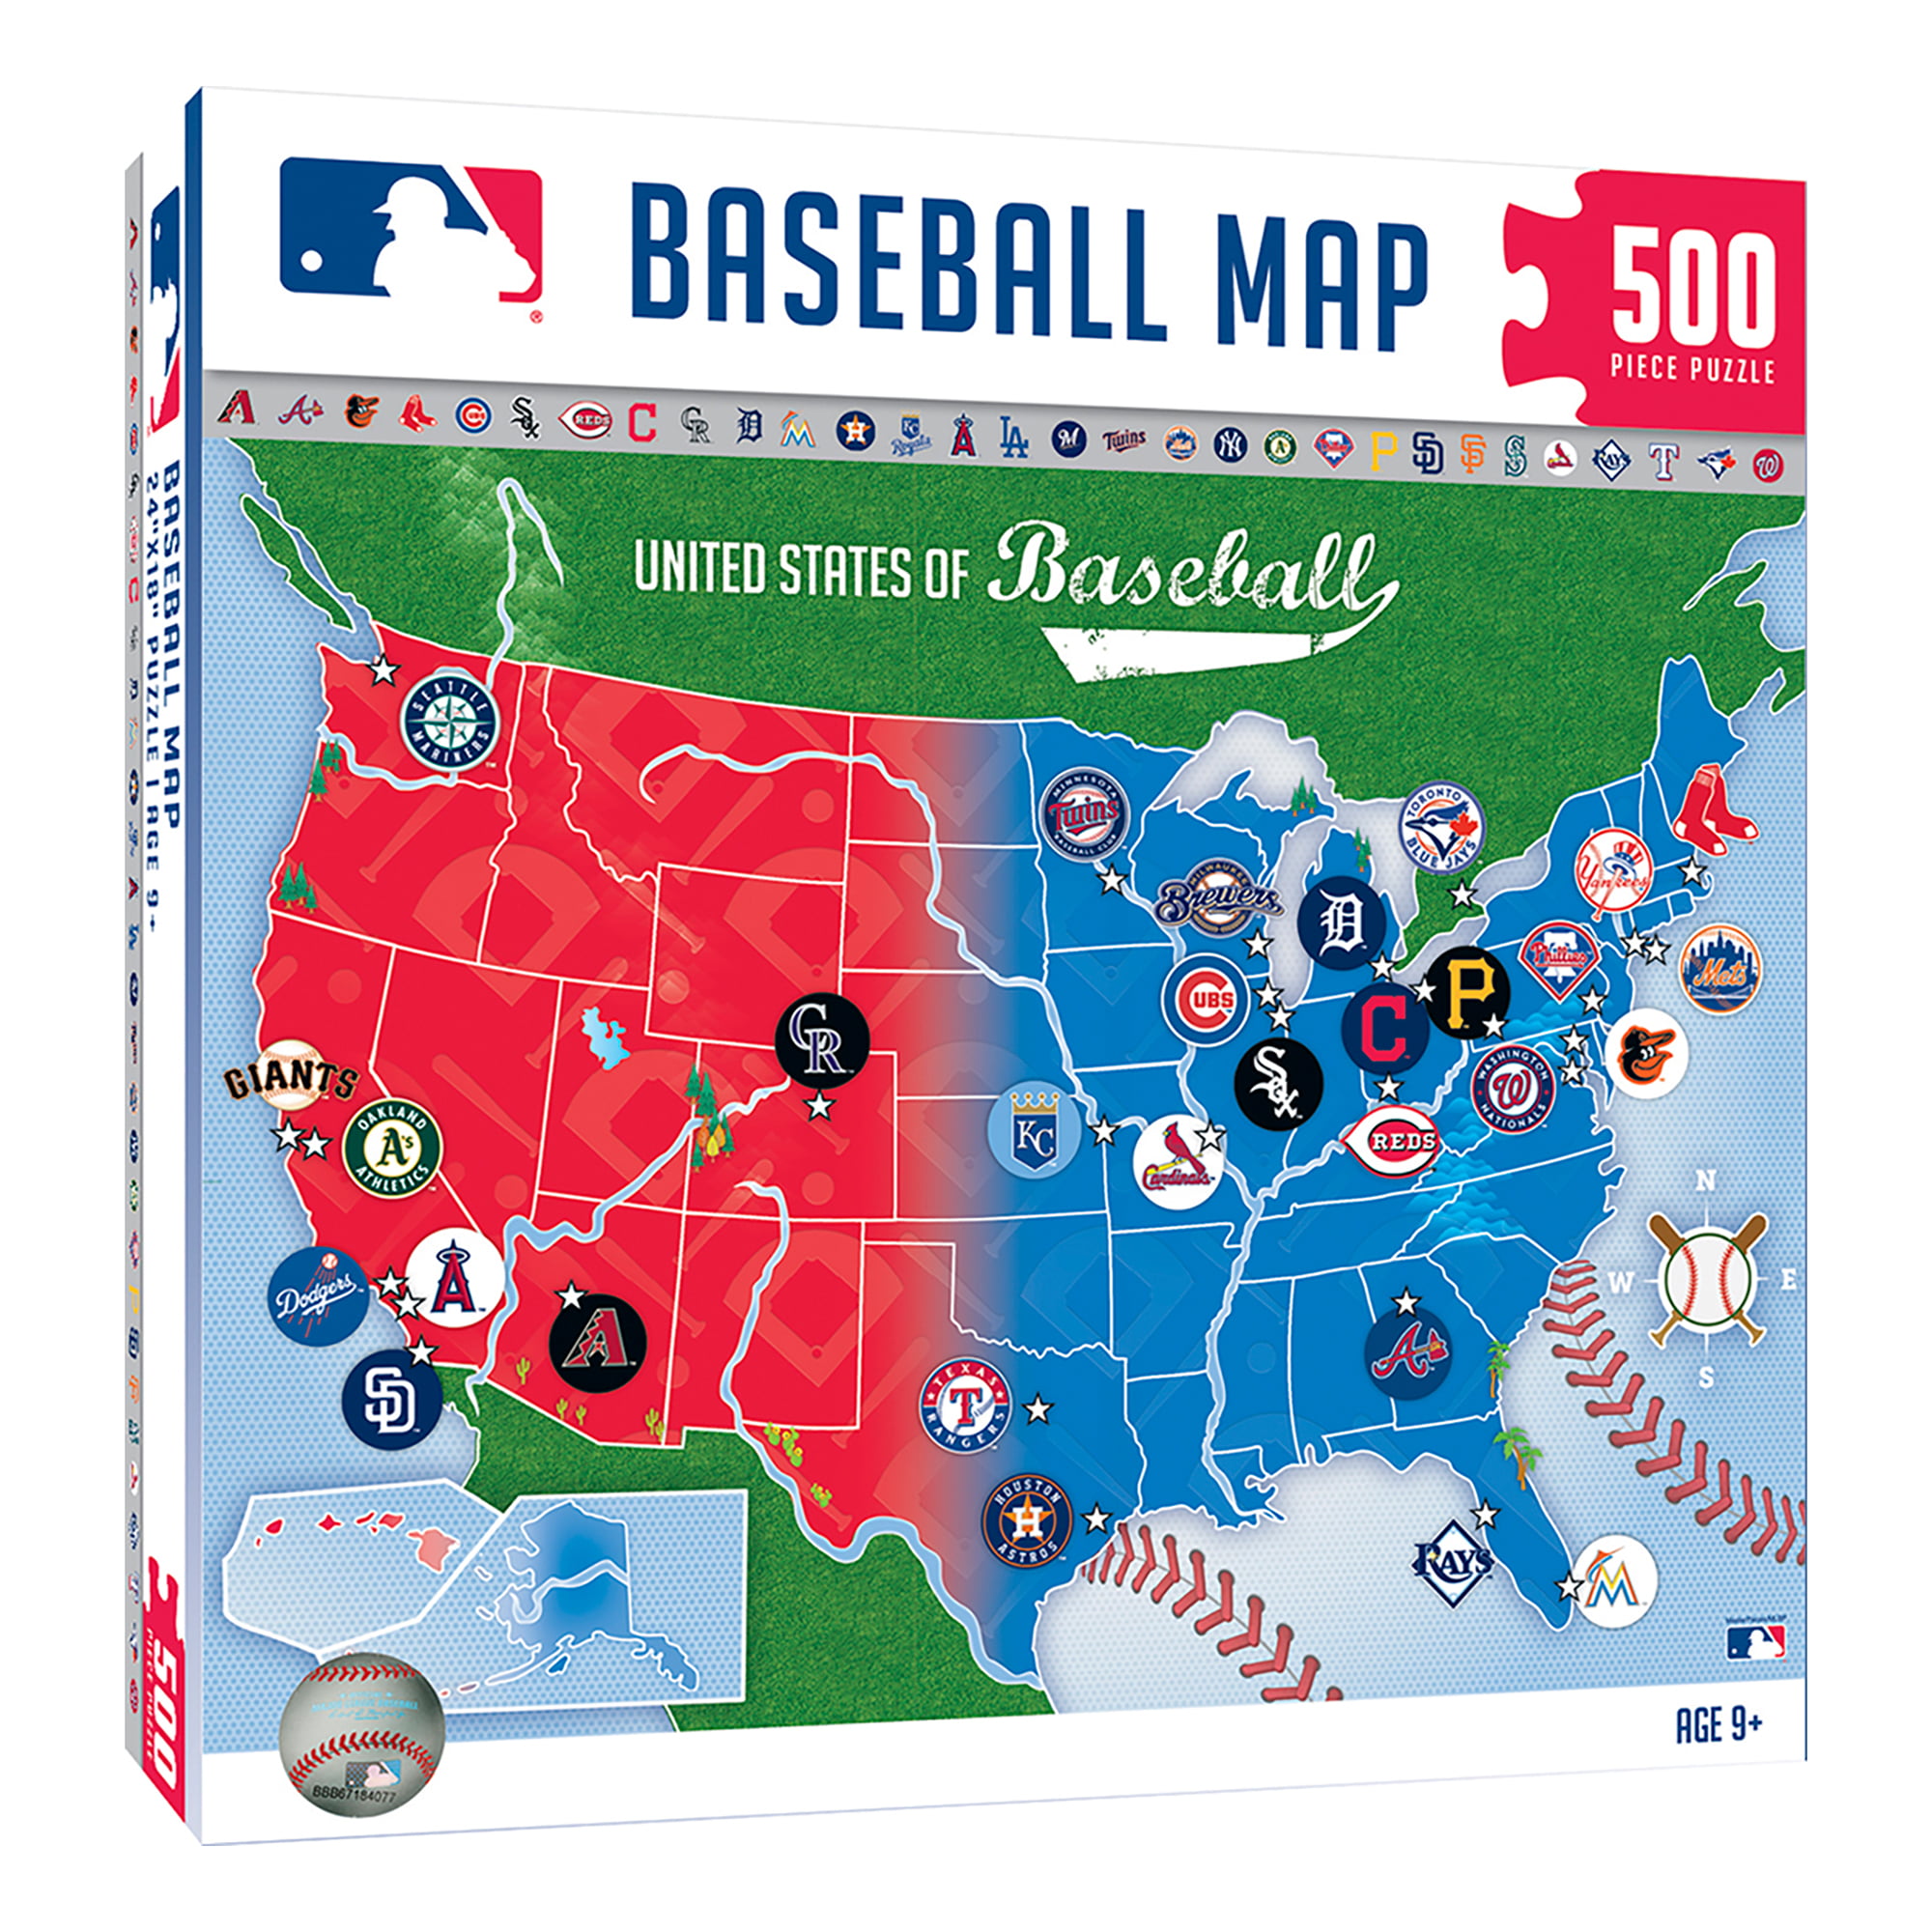 MLB Opening Day 2015 Map Gives You An Idea of Support Before Season  Time